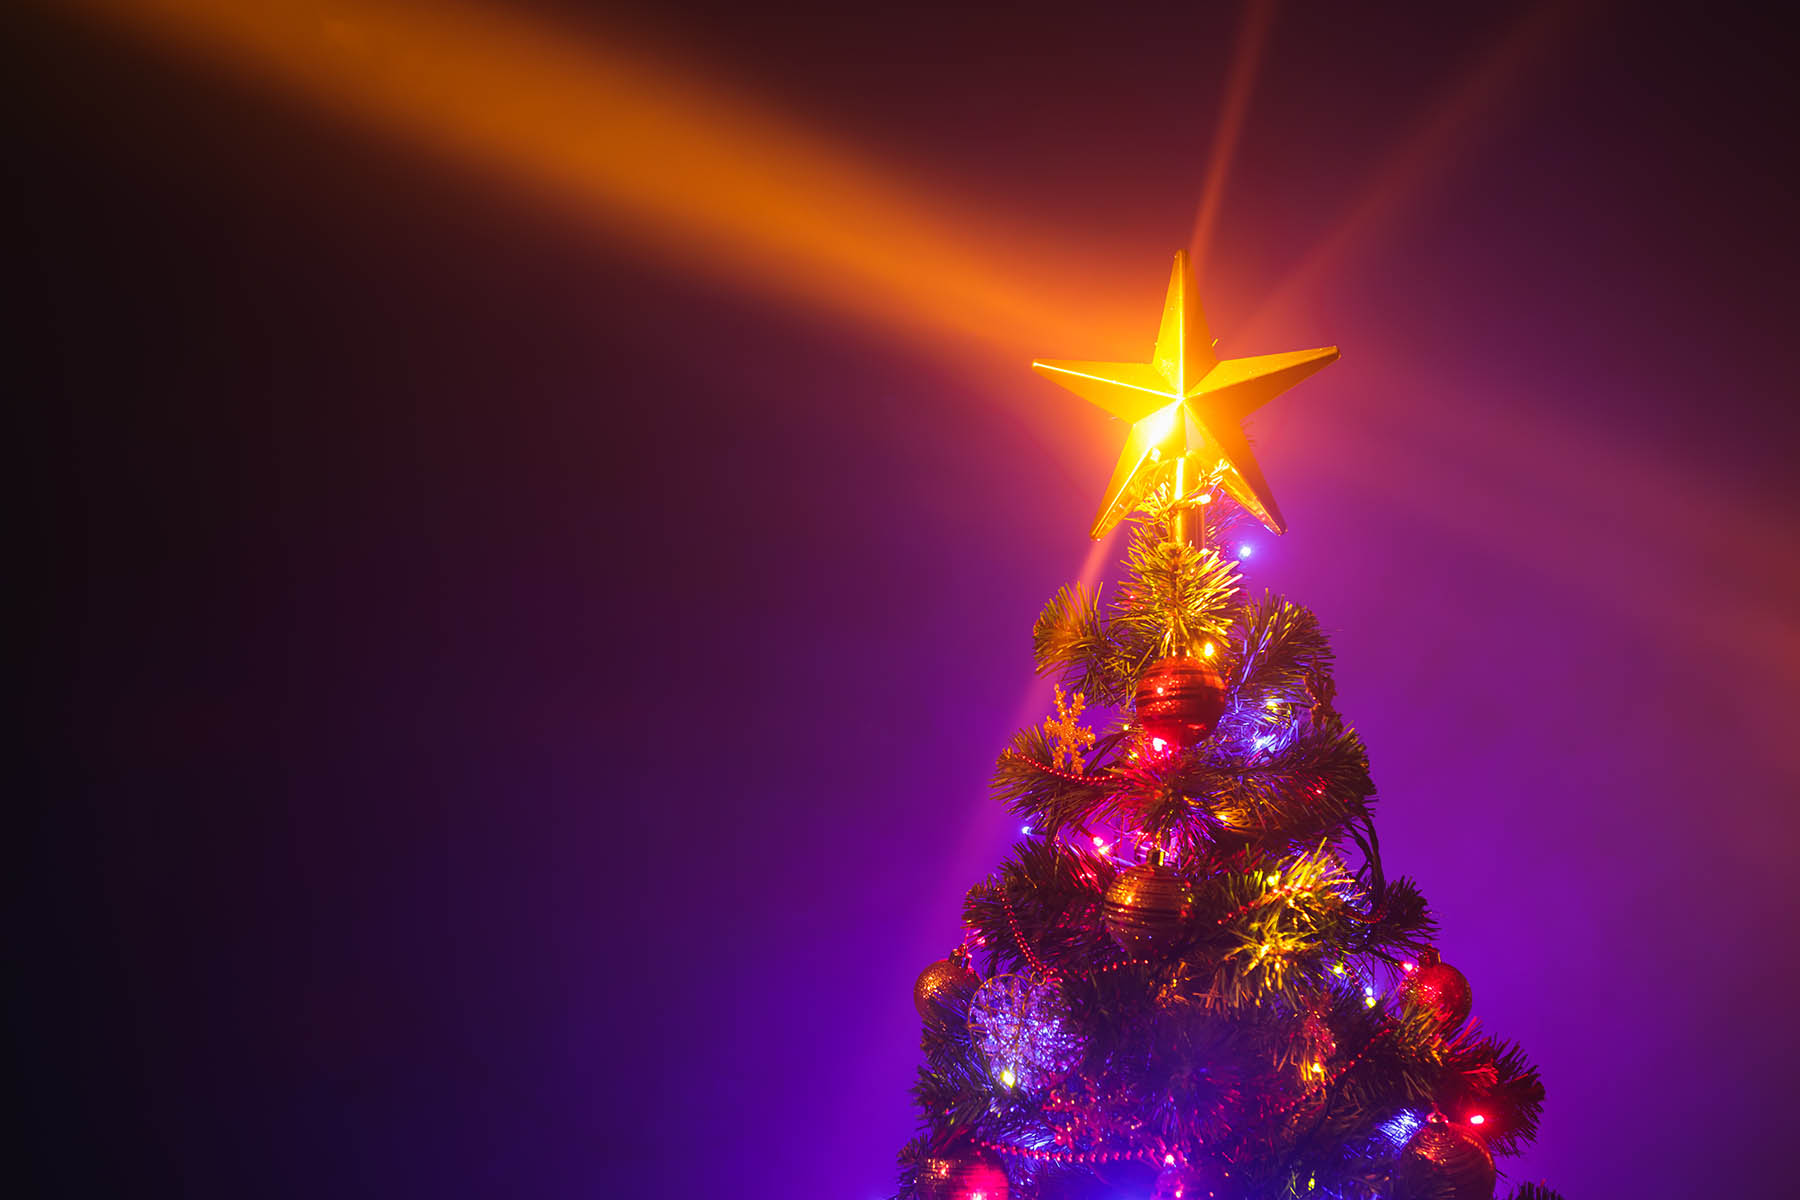 Illuminating Beauty: Selecting the Best Christmas Tree Lights for Sparkle